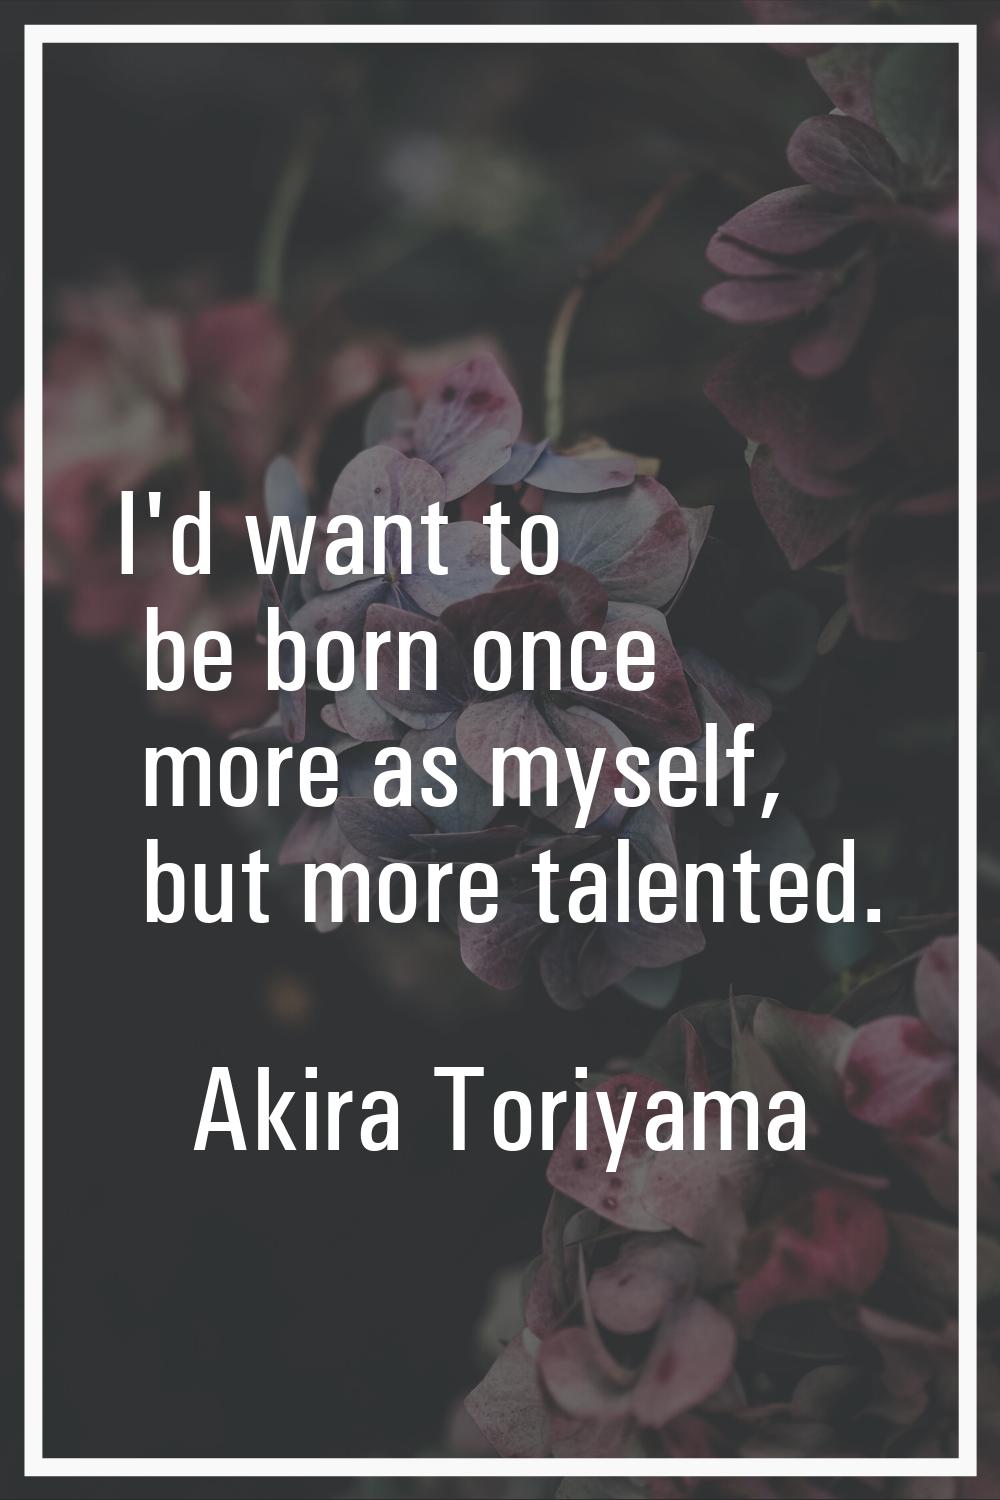 I'd want to be born once more as myself, but more talented.